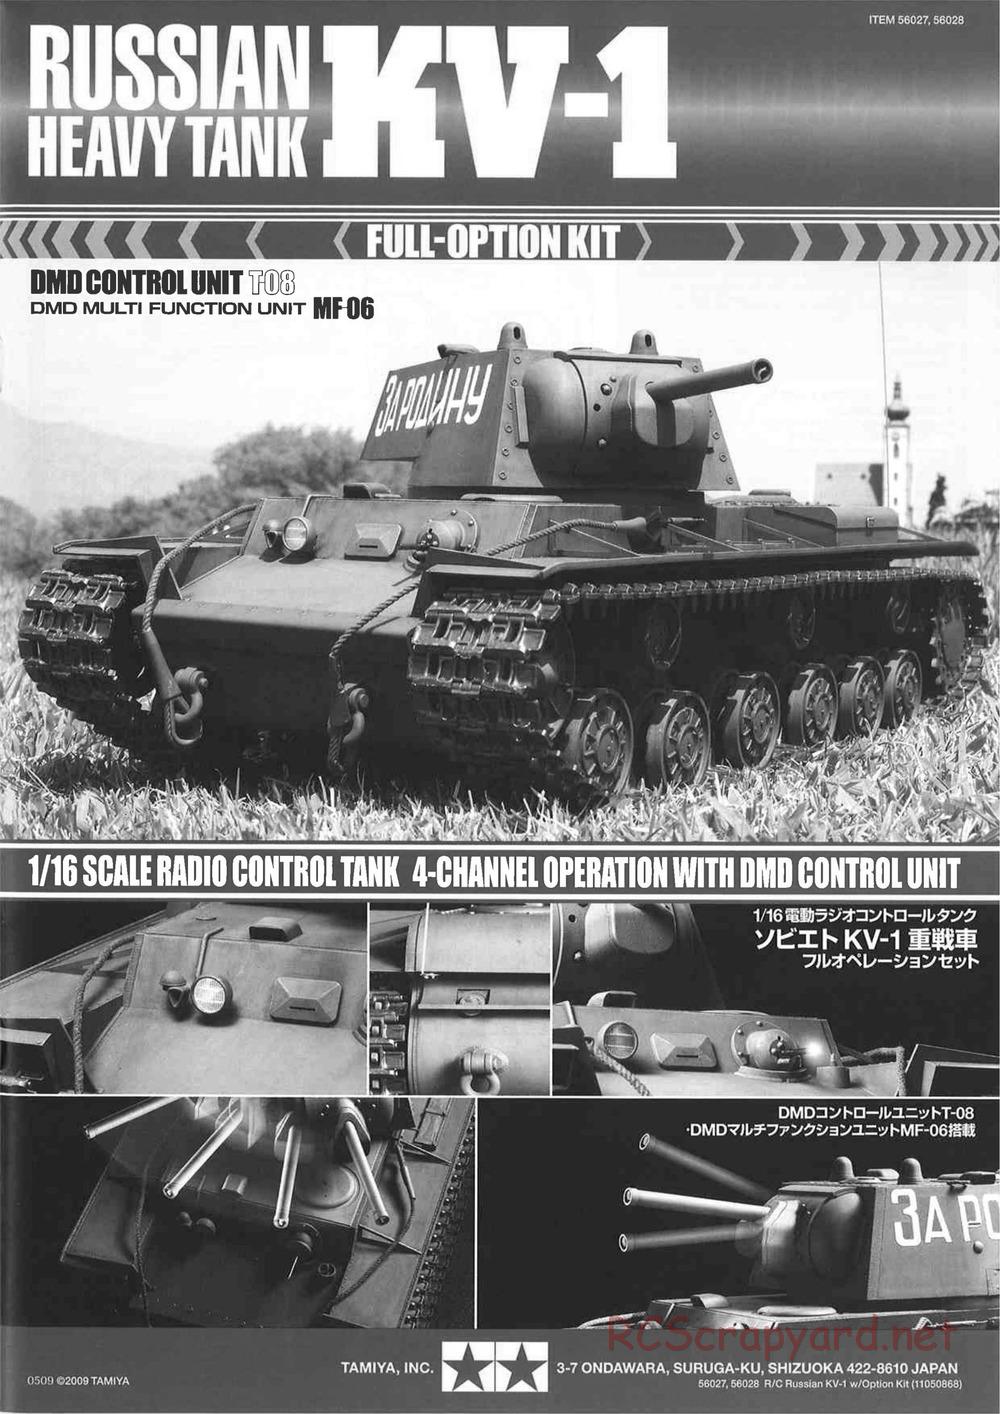 Tamiya - Russian Heavy Tank KV-1 - 1/16 Scale Chassis - Manual - Page 1